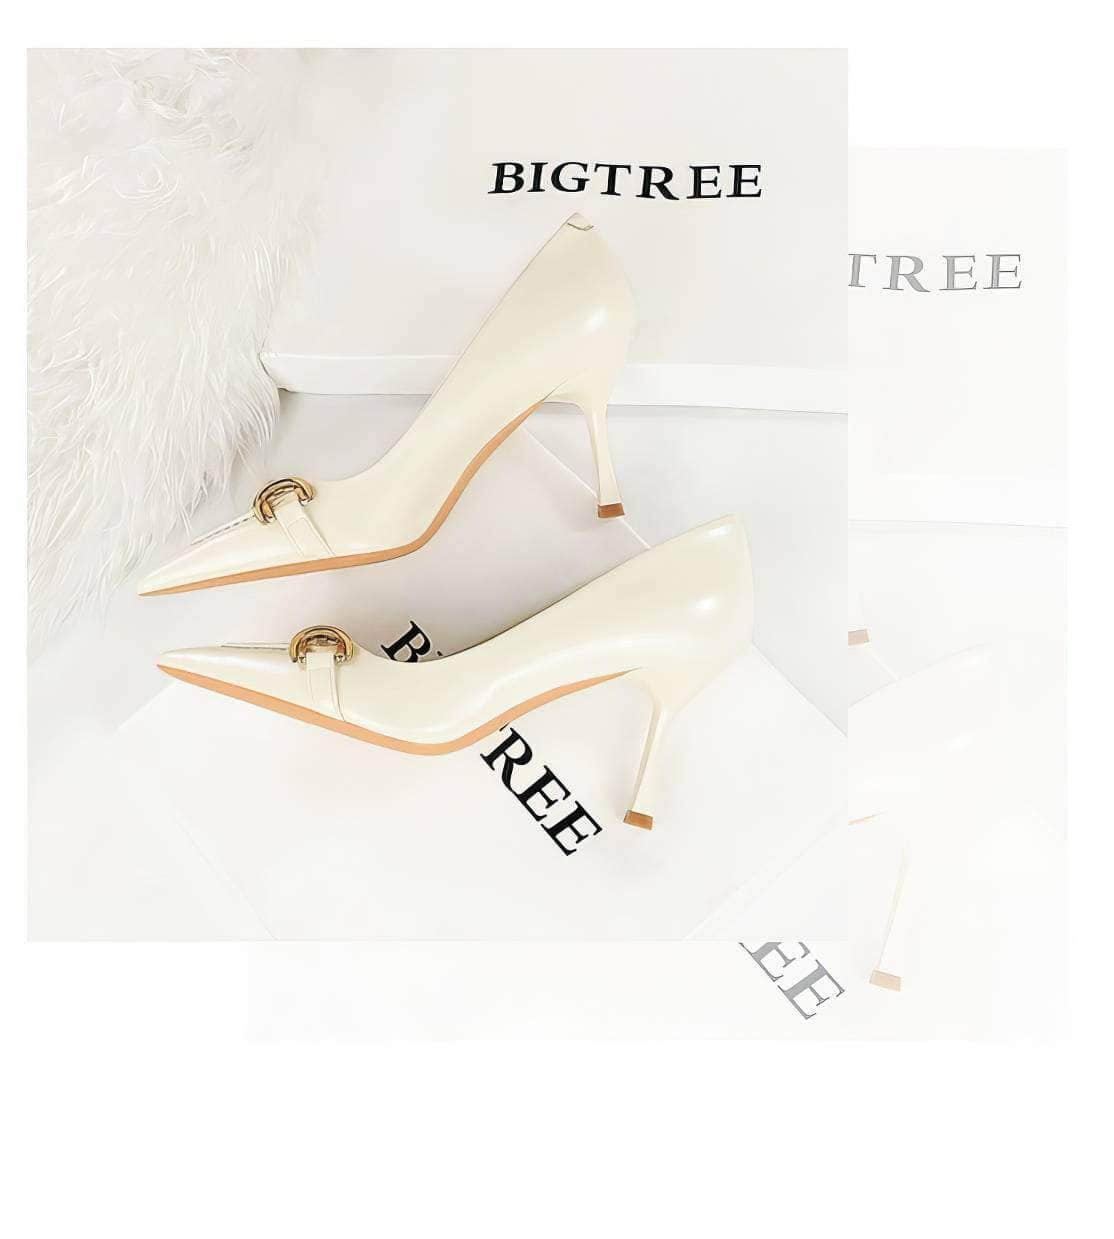 Embroidery Detailed Metallic Chain Pointed Toe Court Heels